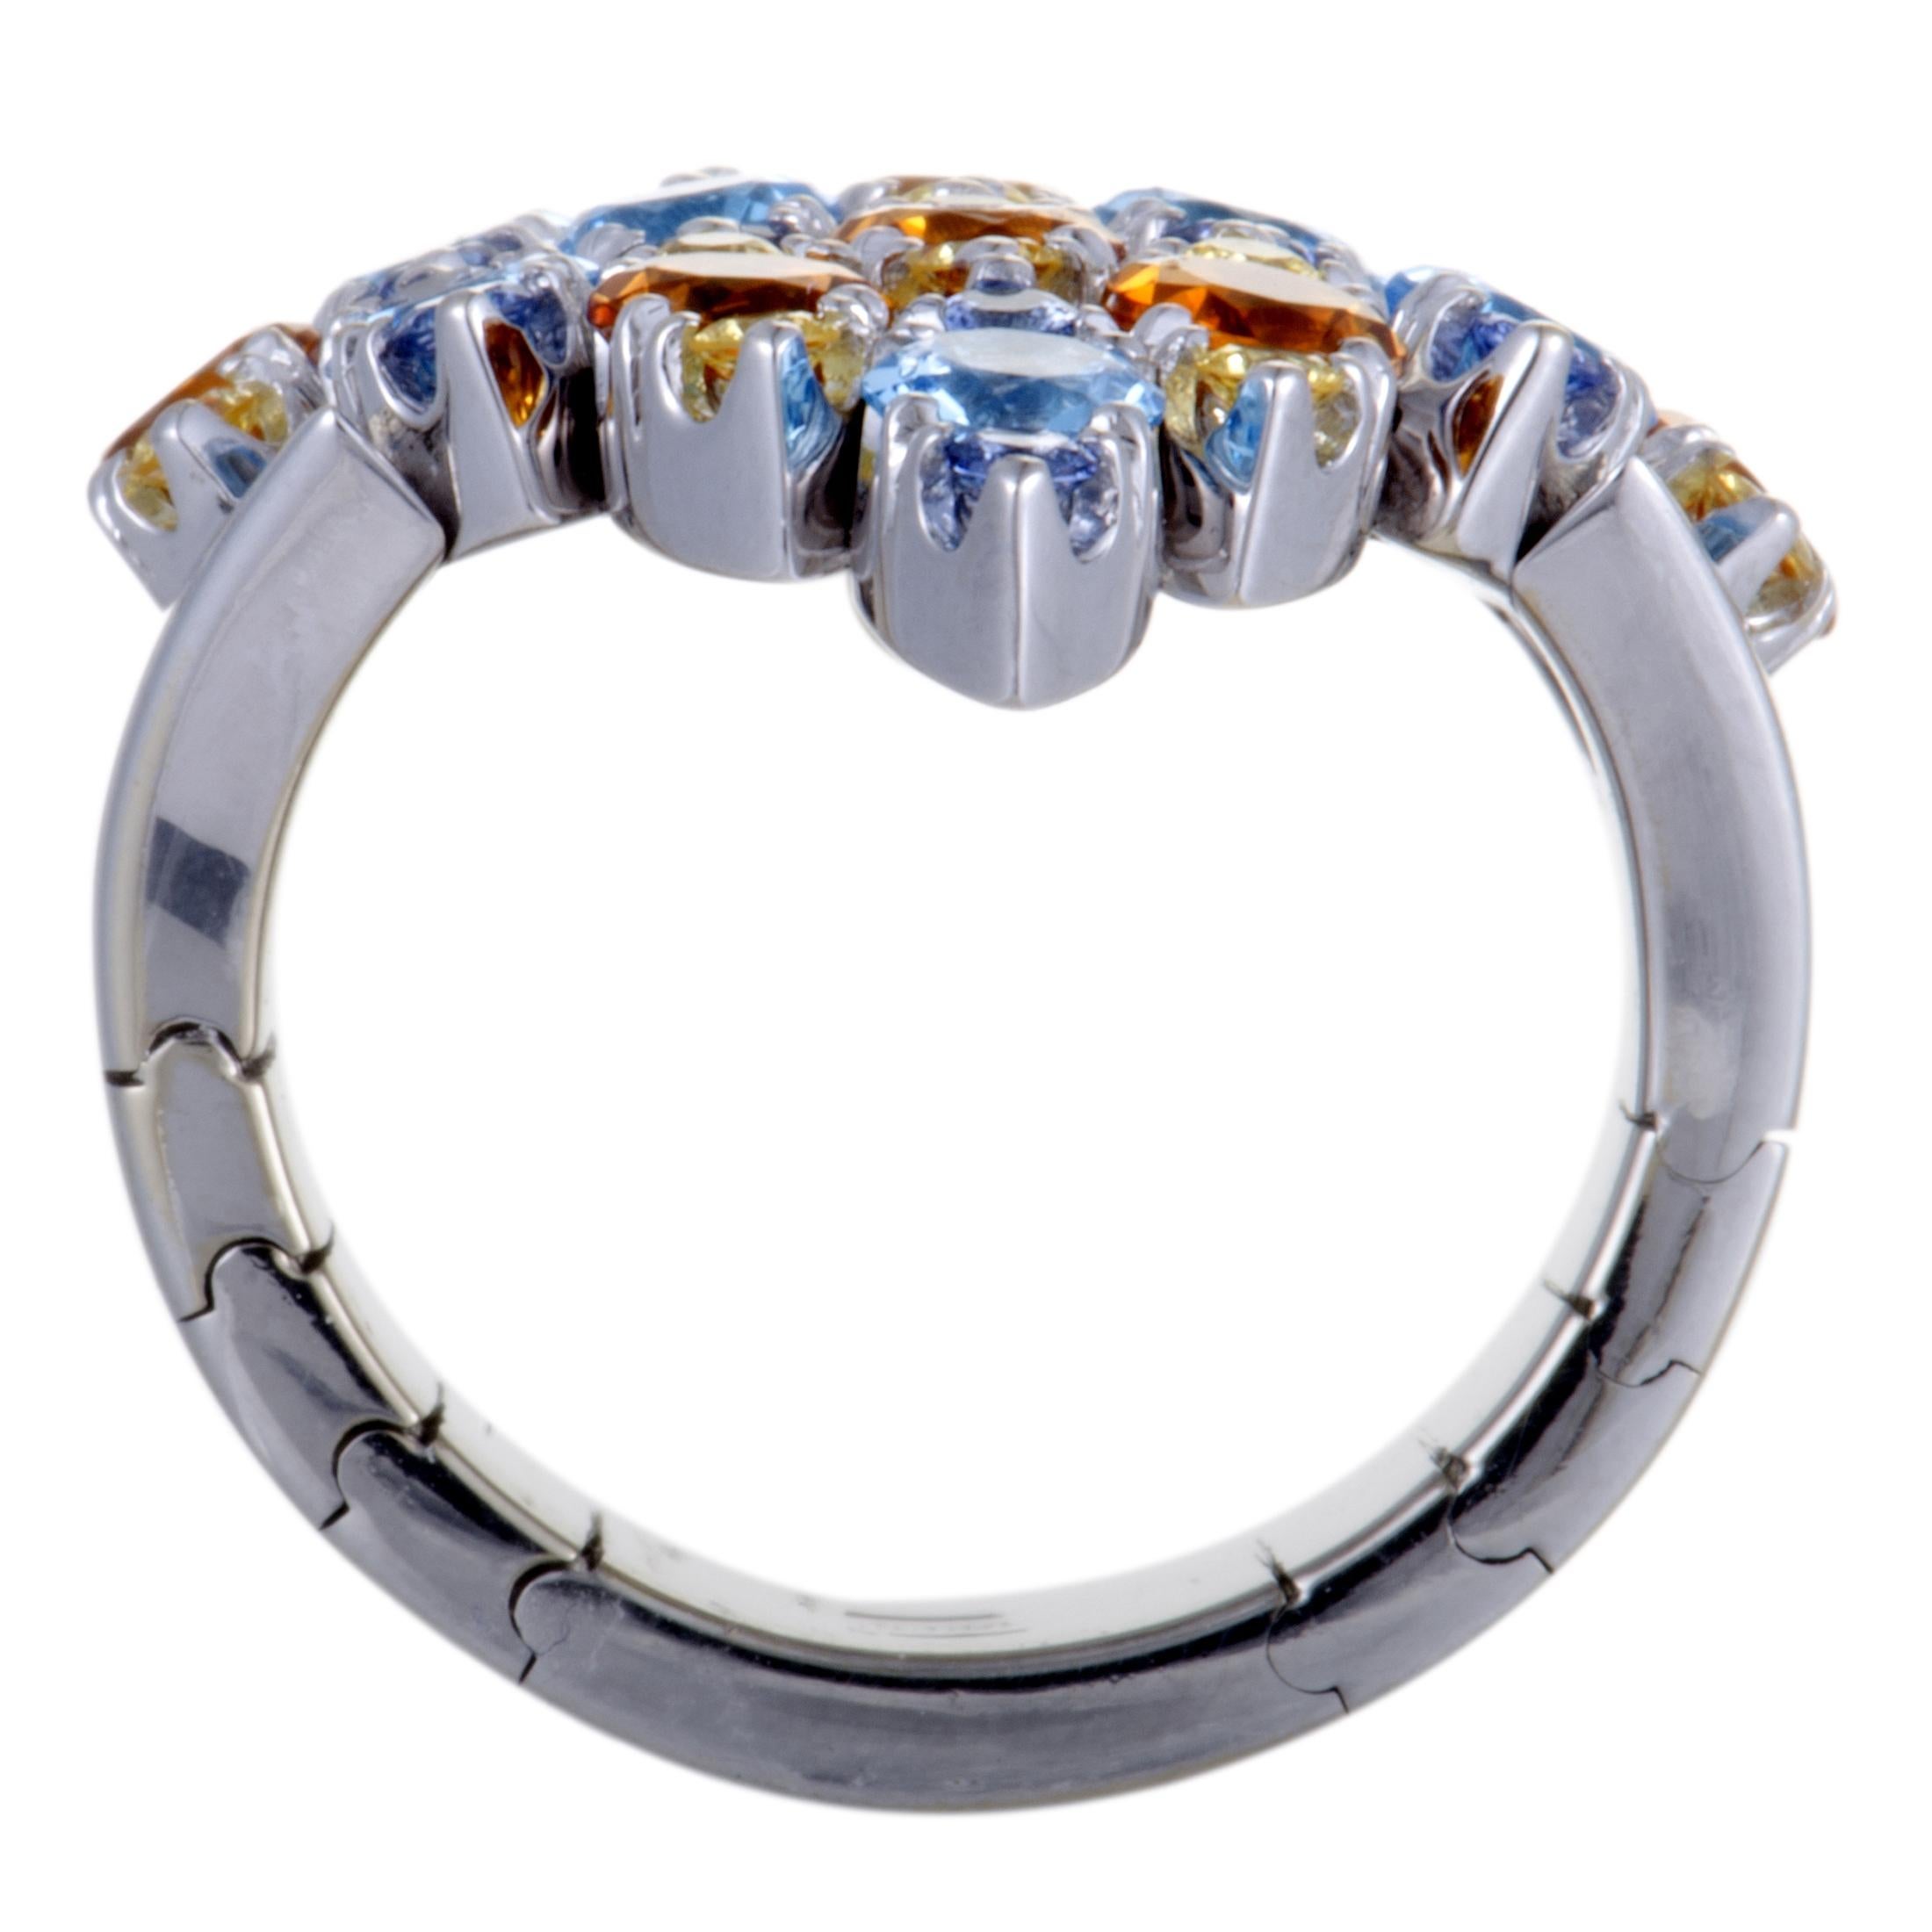 This glamorous 18K white gold ring by Pasquale Bruni exhibits a sensationally alluring style and an extravagantly feminine appeal. The gorgeous ring features 1.24ct of dazzling sapphires and 4.12ct breathtaking topaz and citrine stones that